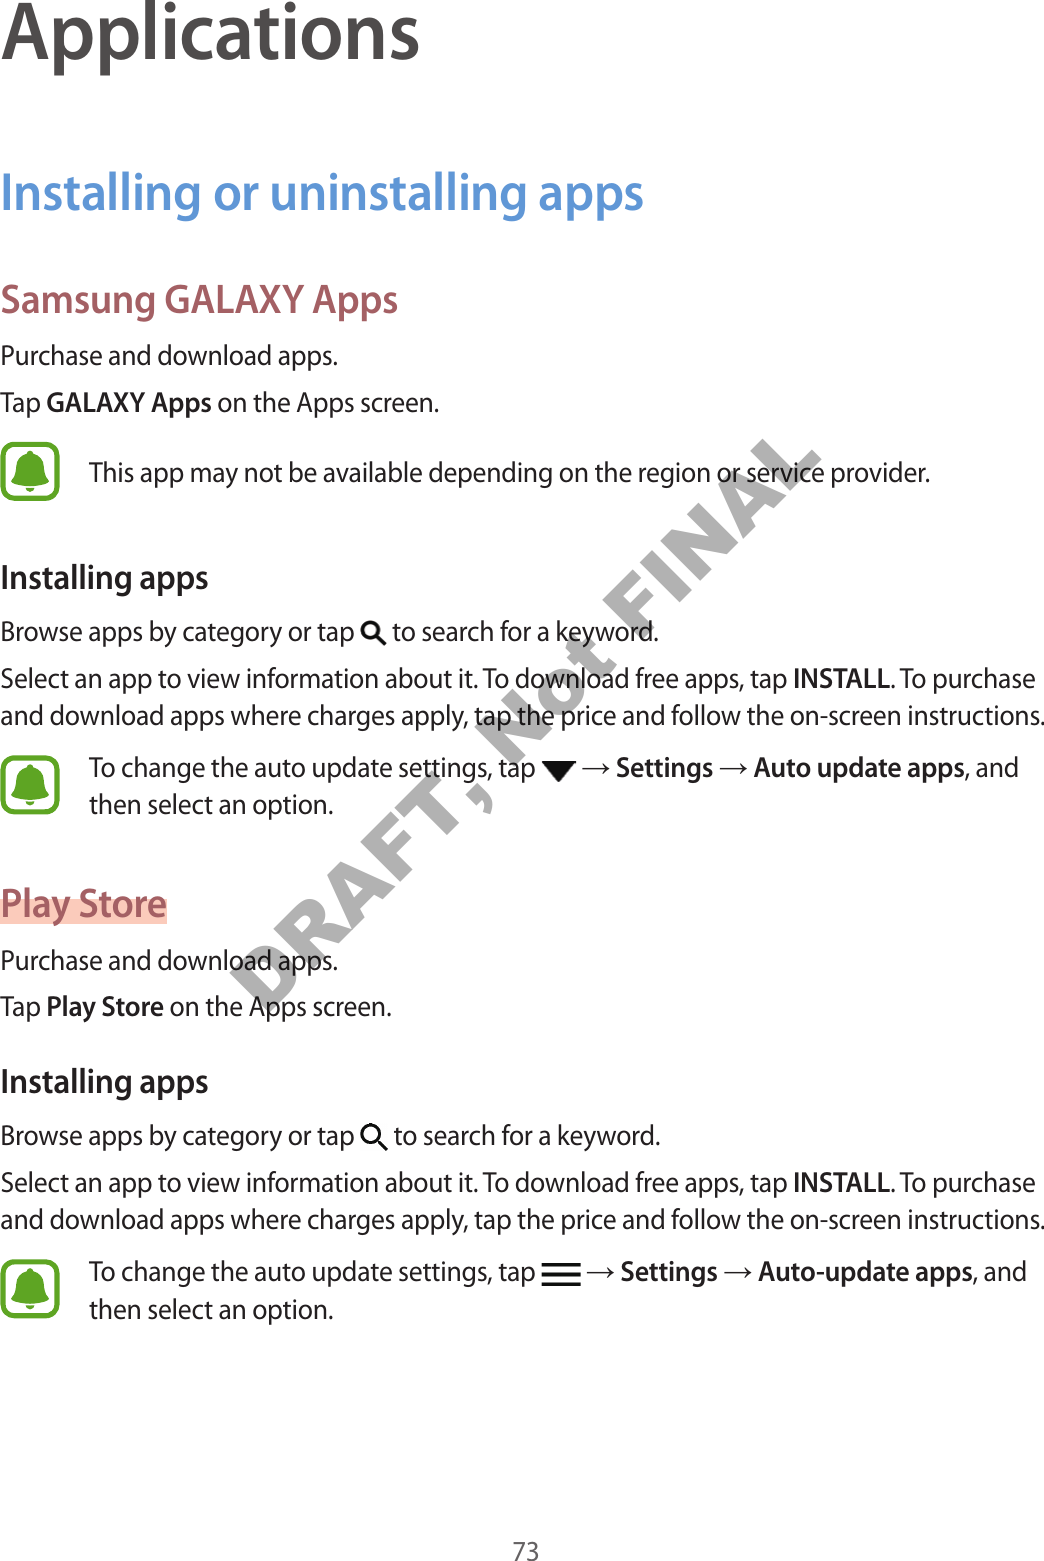 73ApplicationsInstalling or uninstalling appsSamsung GALAXY AppsPurchase and download apps.Tap GALAXY Apps on the Apps screen.This app may not be available depending on the region or service provider.Installing appsBrowse apps by category or tap   to search for a keyword.Select an app to view information about it. To download free apps, tap INSTALL. To purchase and download apps where charges apply, tap the price and follow the on-screen instructions.To change the auto update settings, tap    Settings  Auto update apps, and then select an option.Play StorePurchase and download apps.Tap Play Store on the Apps screen.Installing appsBrowse apps by category or tap   to search for a keyword.Select an app to view information about it. To download free apps, tap INSTALL. To purchase and download apps where charges apply, tap the price and follow the on-screen instructions.To change the auto update settings, tap    Settings  Auto-update apps, and then select an option.DRAFT, Not FINAL